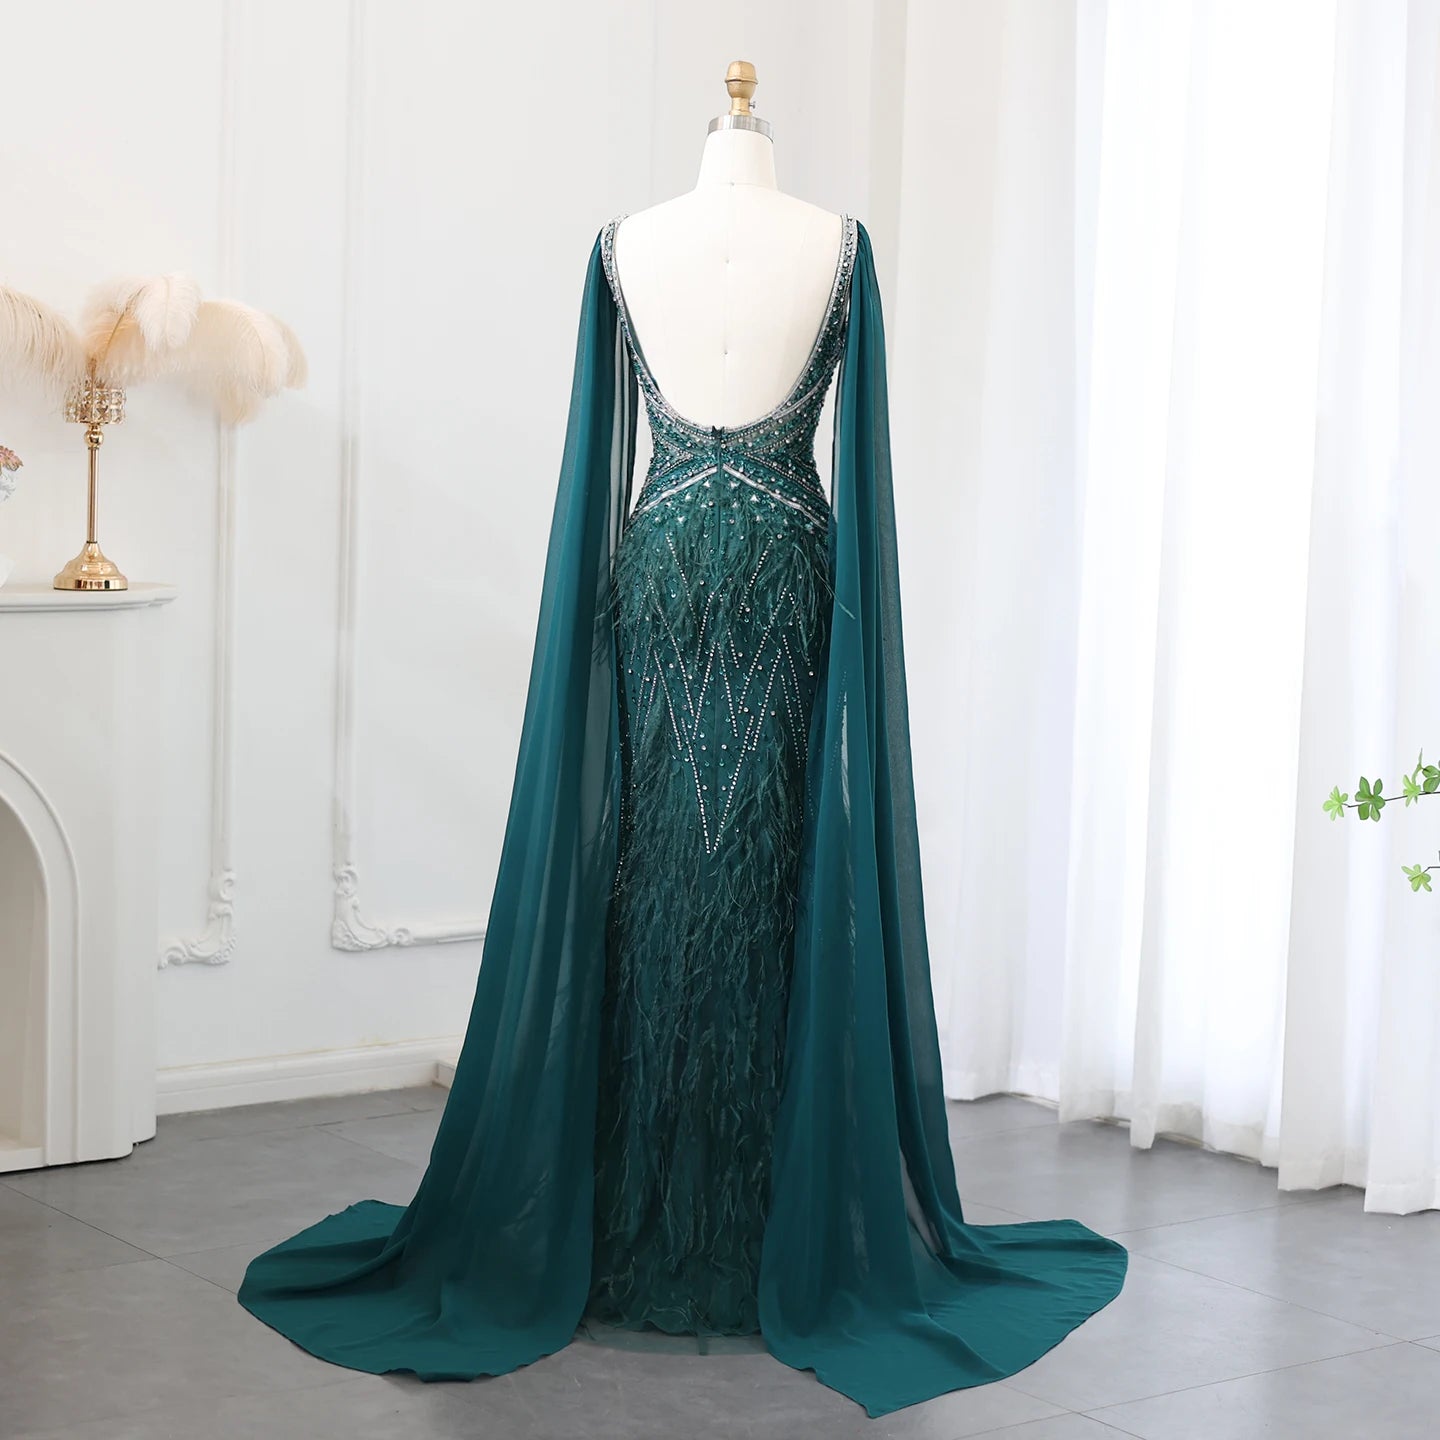 UU-Sharon Said Luxury Feathers Blue Mermaid Evening Dress with Cape Sleeves Lilac Beaded Prom Dresses for Women Wedding Party